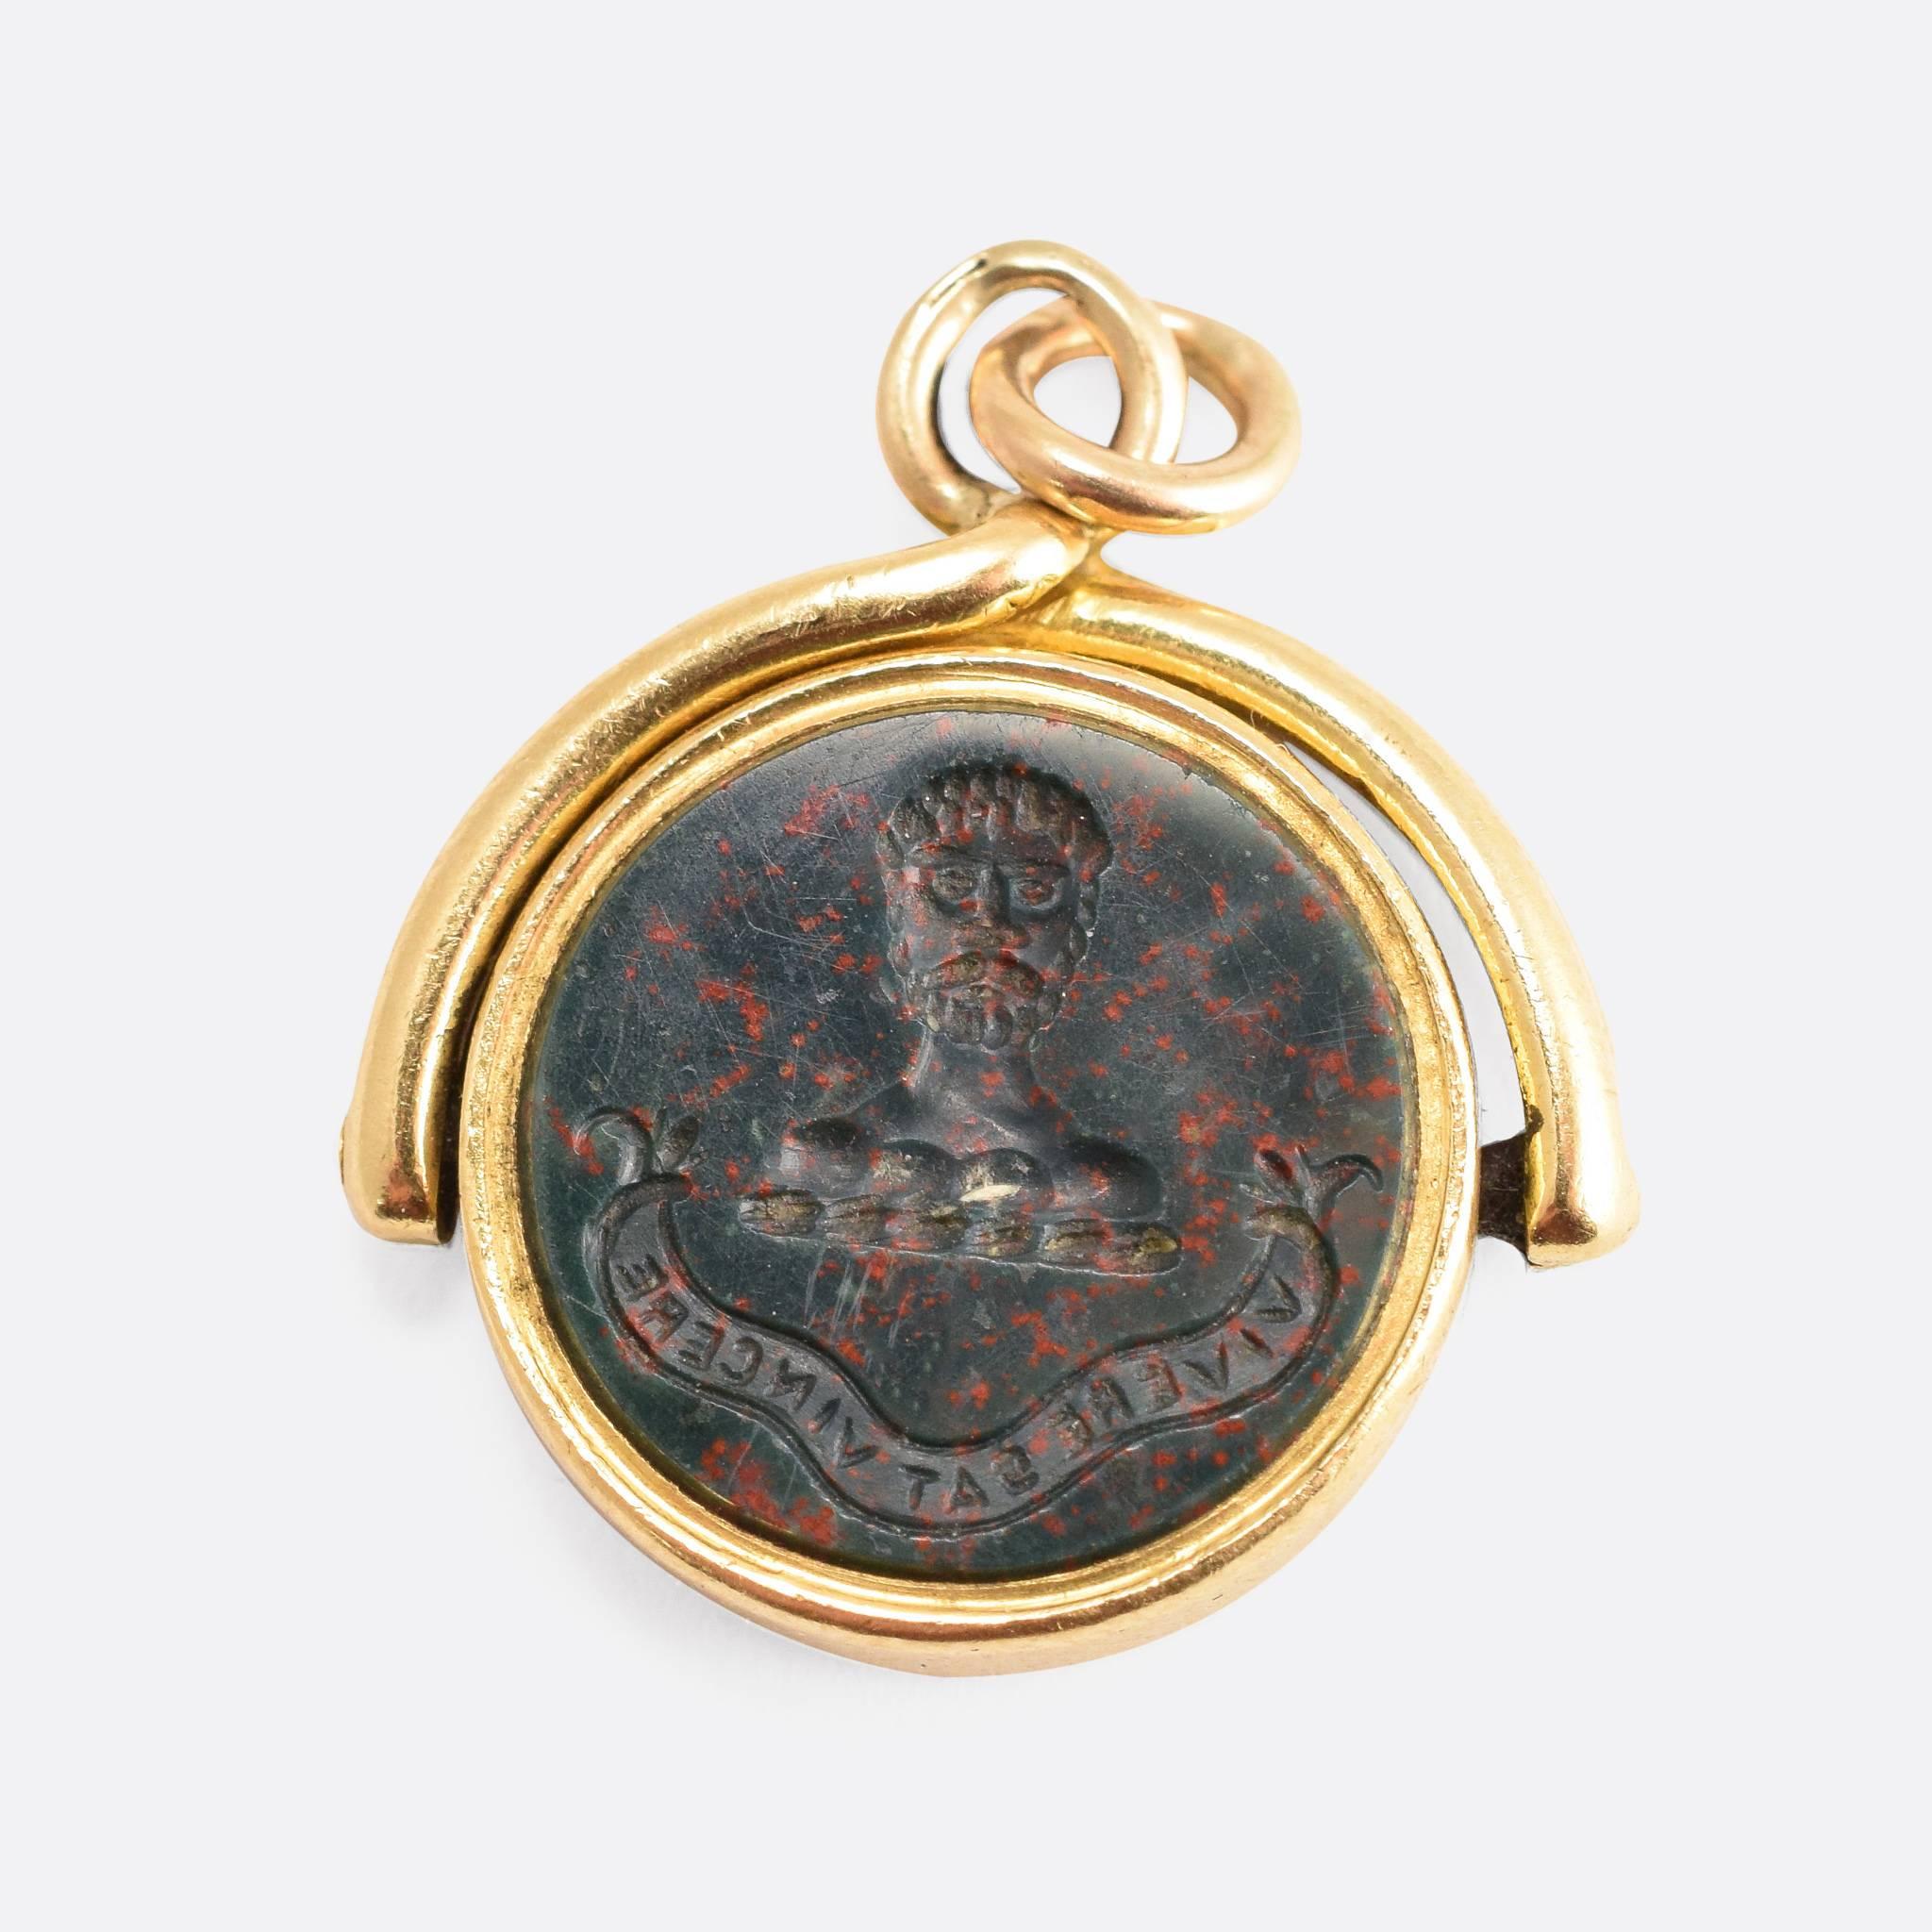 This attractive antique spinner fob is set with two carved stone panels: one bloodstone, the other carnelian agate. Each panel is carved with a heraldic crest, above Latin motto. The words read 